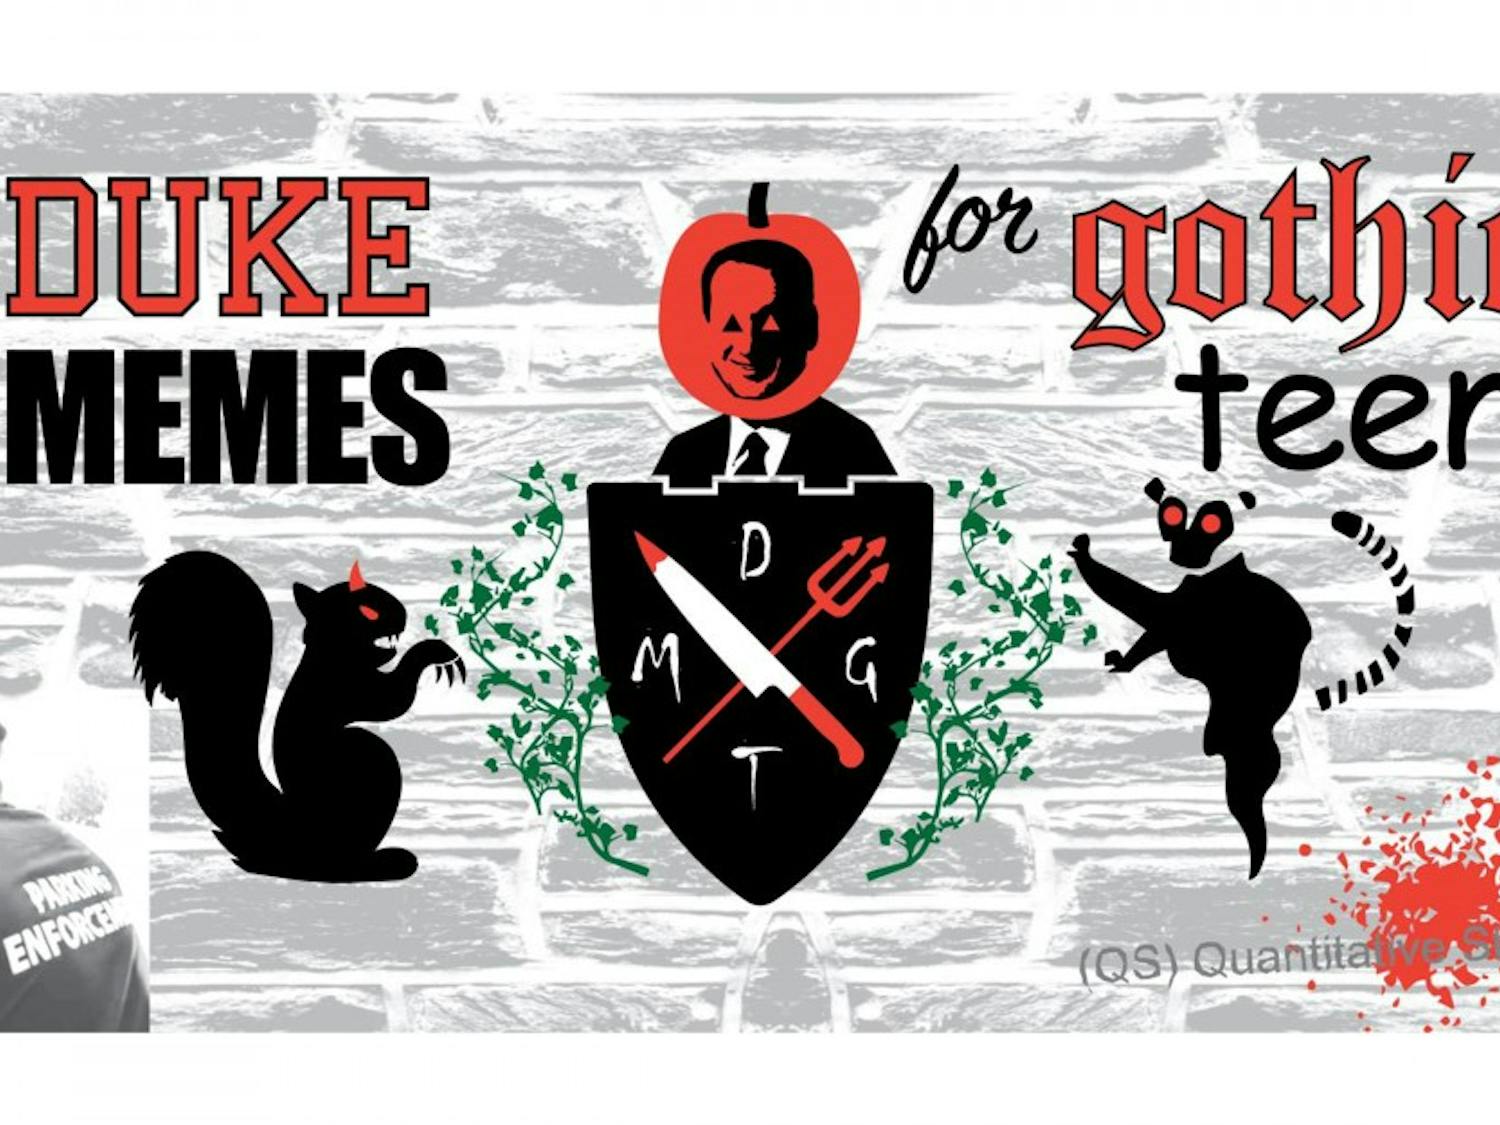 The Duke memes page cover photo has several symbols and images that reference different pieces of the University’s culture.